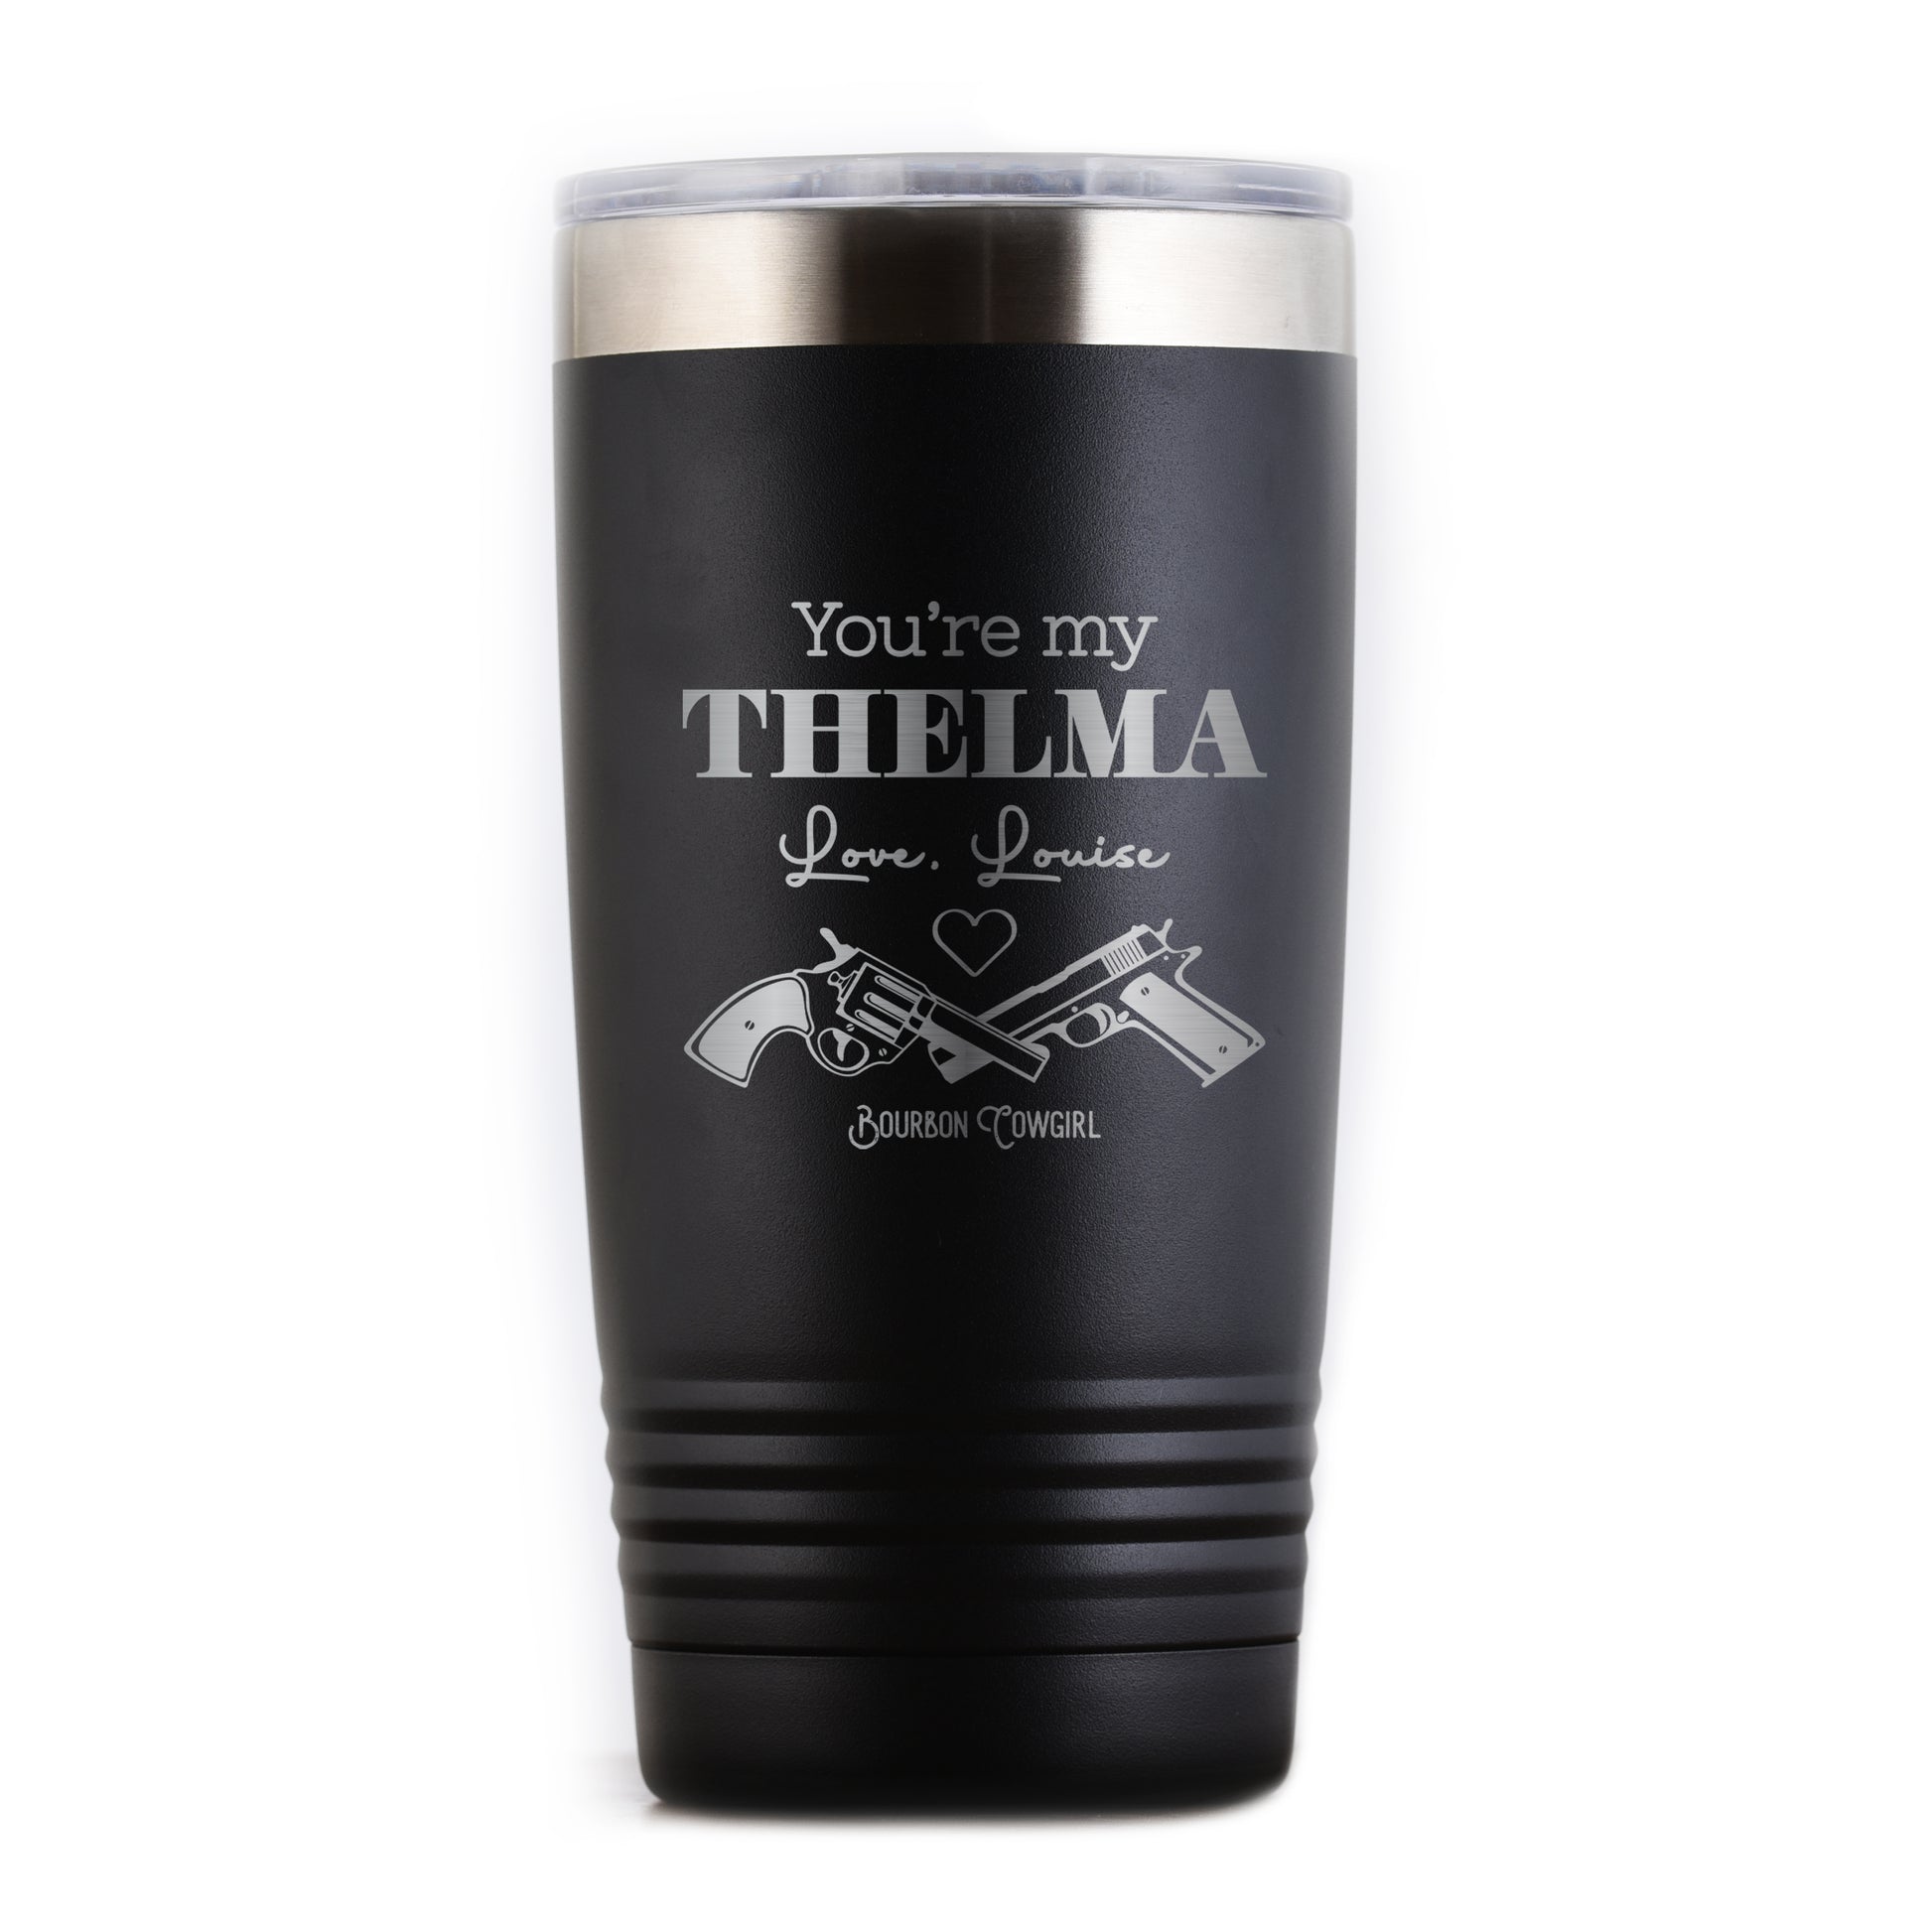 Thelma Louise Gifts & Merchandise for Sale